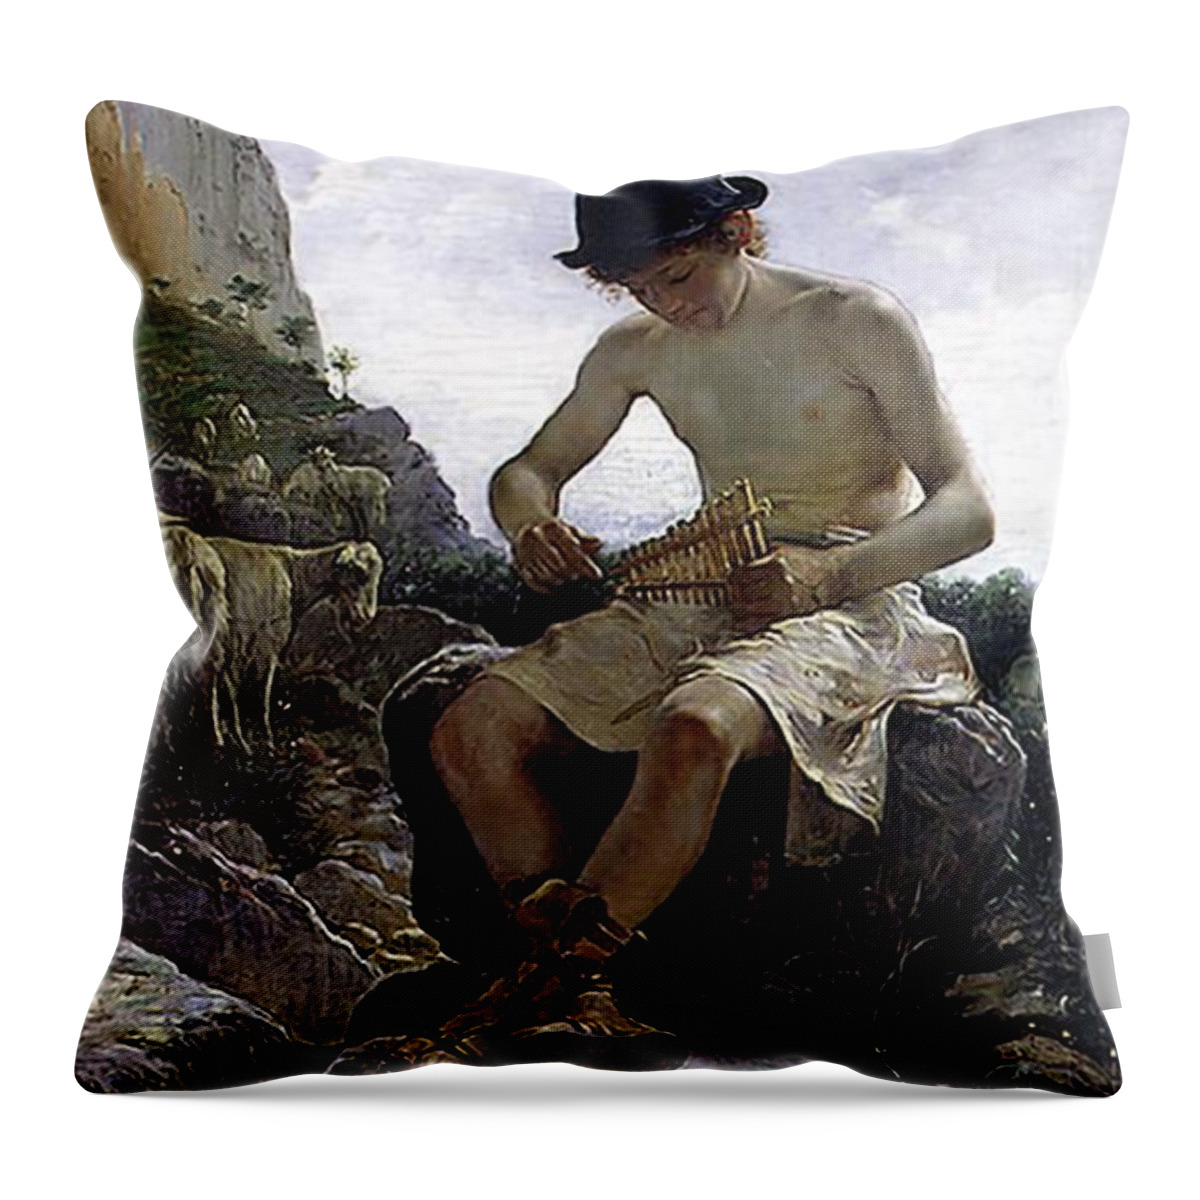 Juan Bela Y Morales Throw Pillow featuring the painting Young Shepherd by Juan Bela y Morales